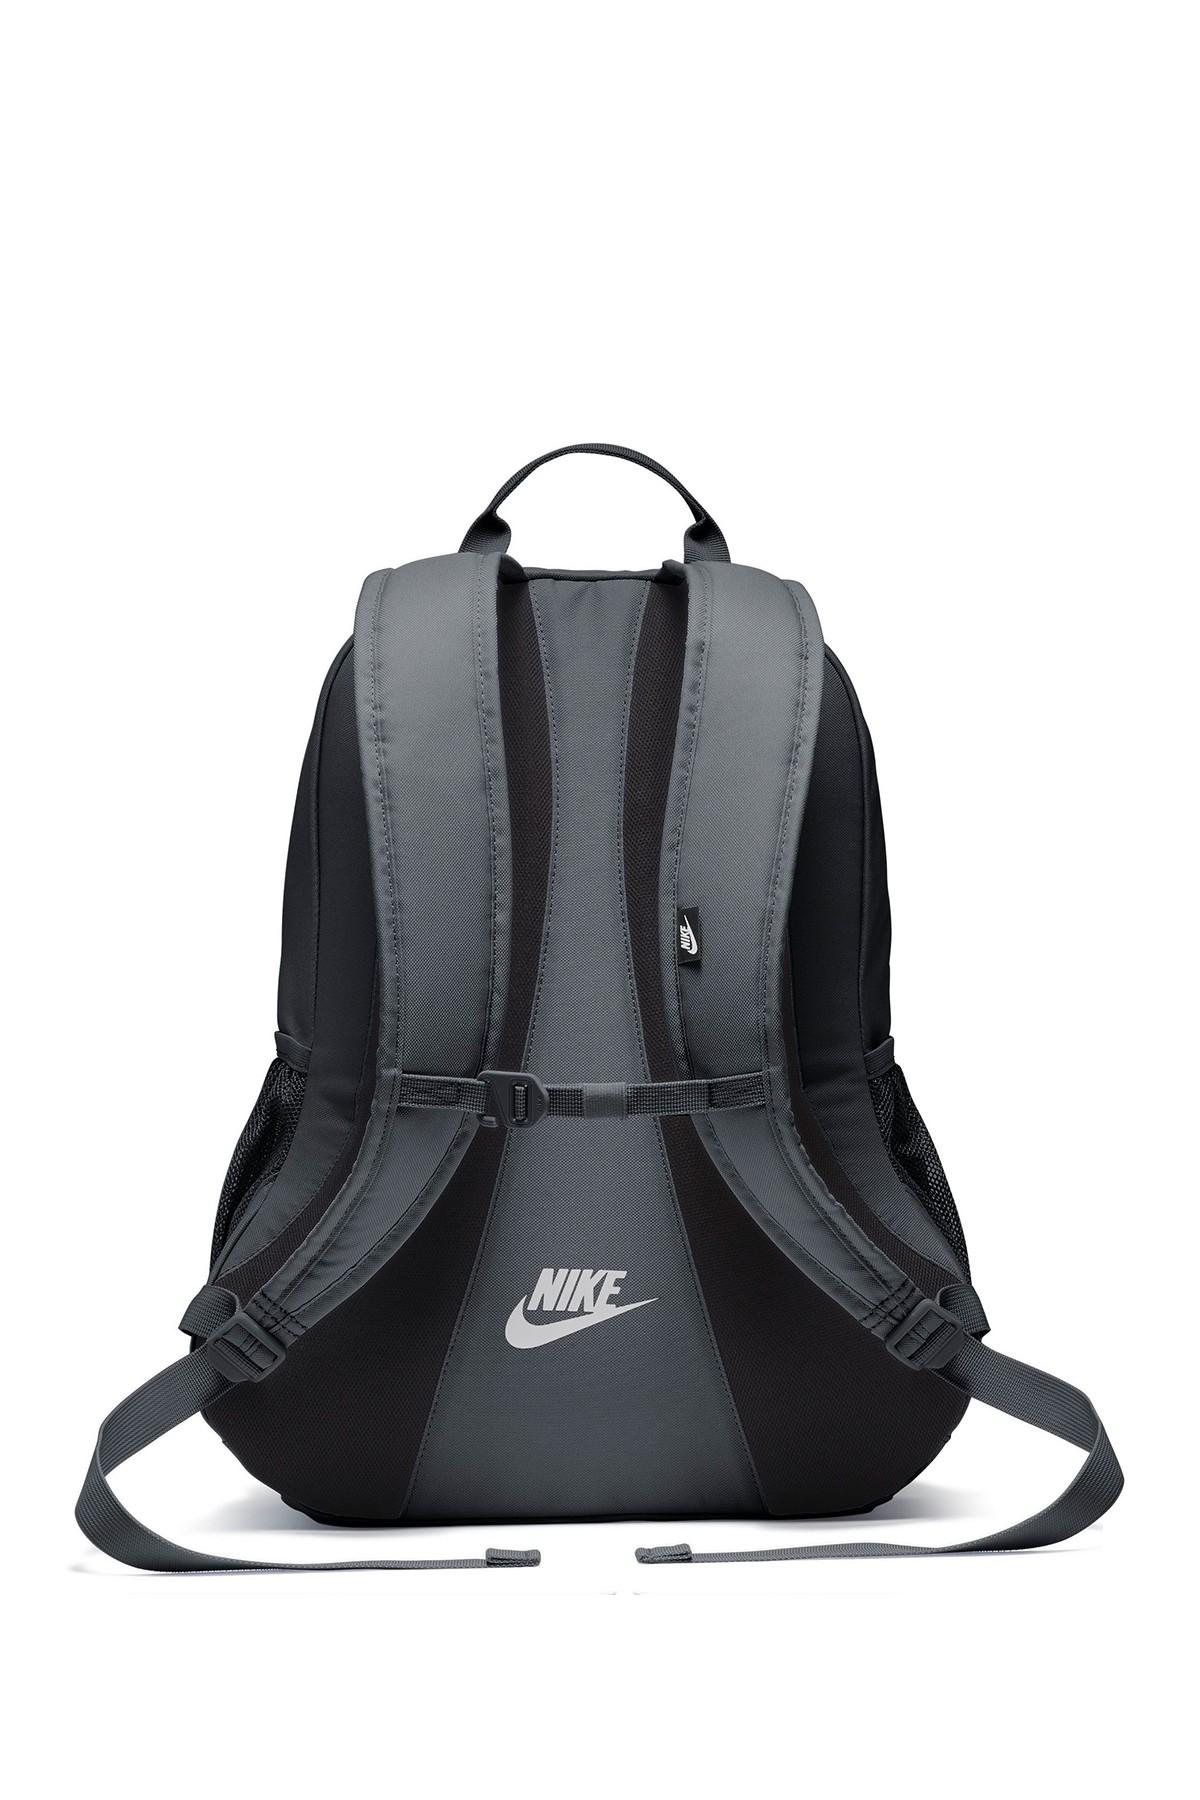 Nike Synthetic Hayward Futura Backpack in Black for Men - Lyst